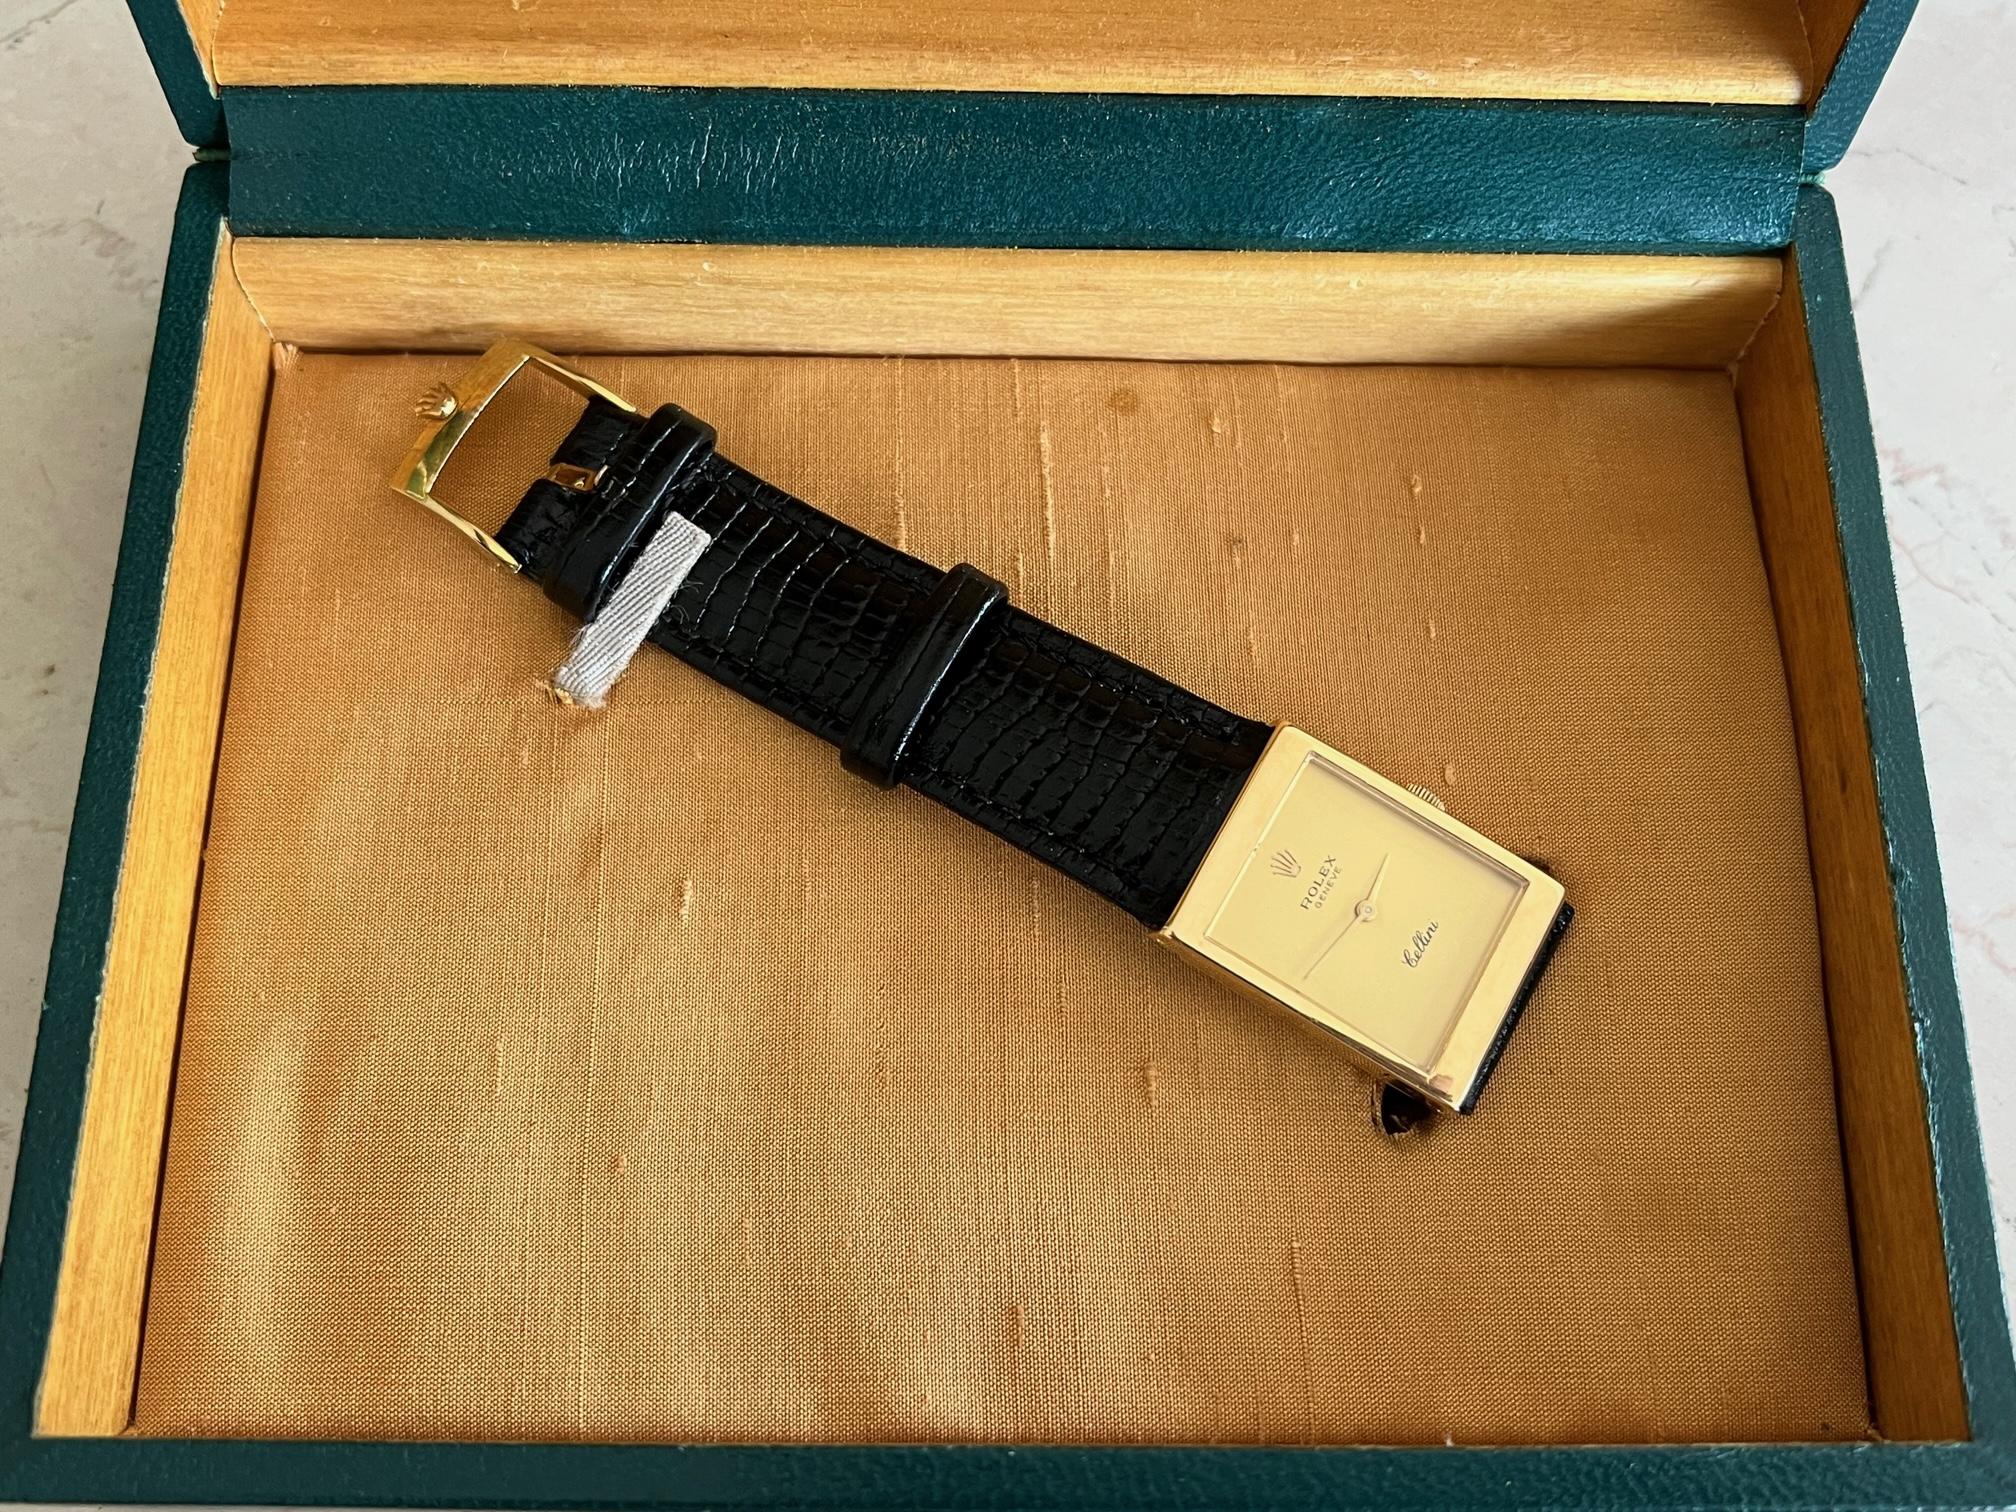 A beautiful and rare with original inner/outer box Rolex Cellini, reference 4014, ca'1970's. Manual wind watch in 18k gold. Wears nicely on the wrist at 22x30mm case. Bracelet replaced. We have been a 1stdibs seller since 2004, brick and mortar